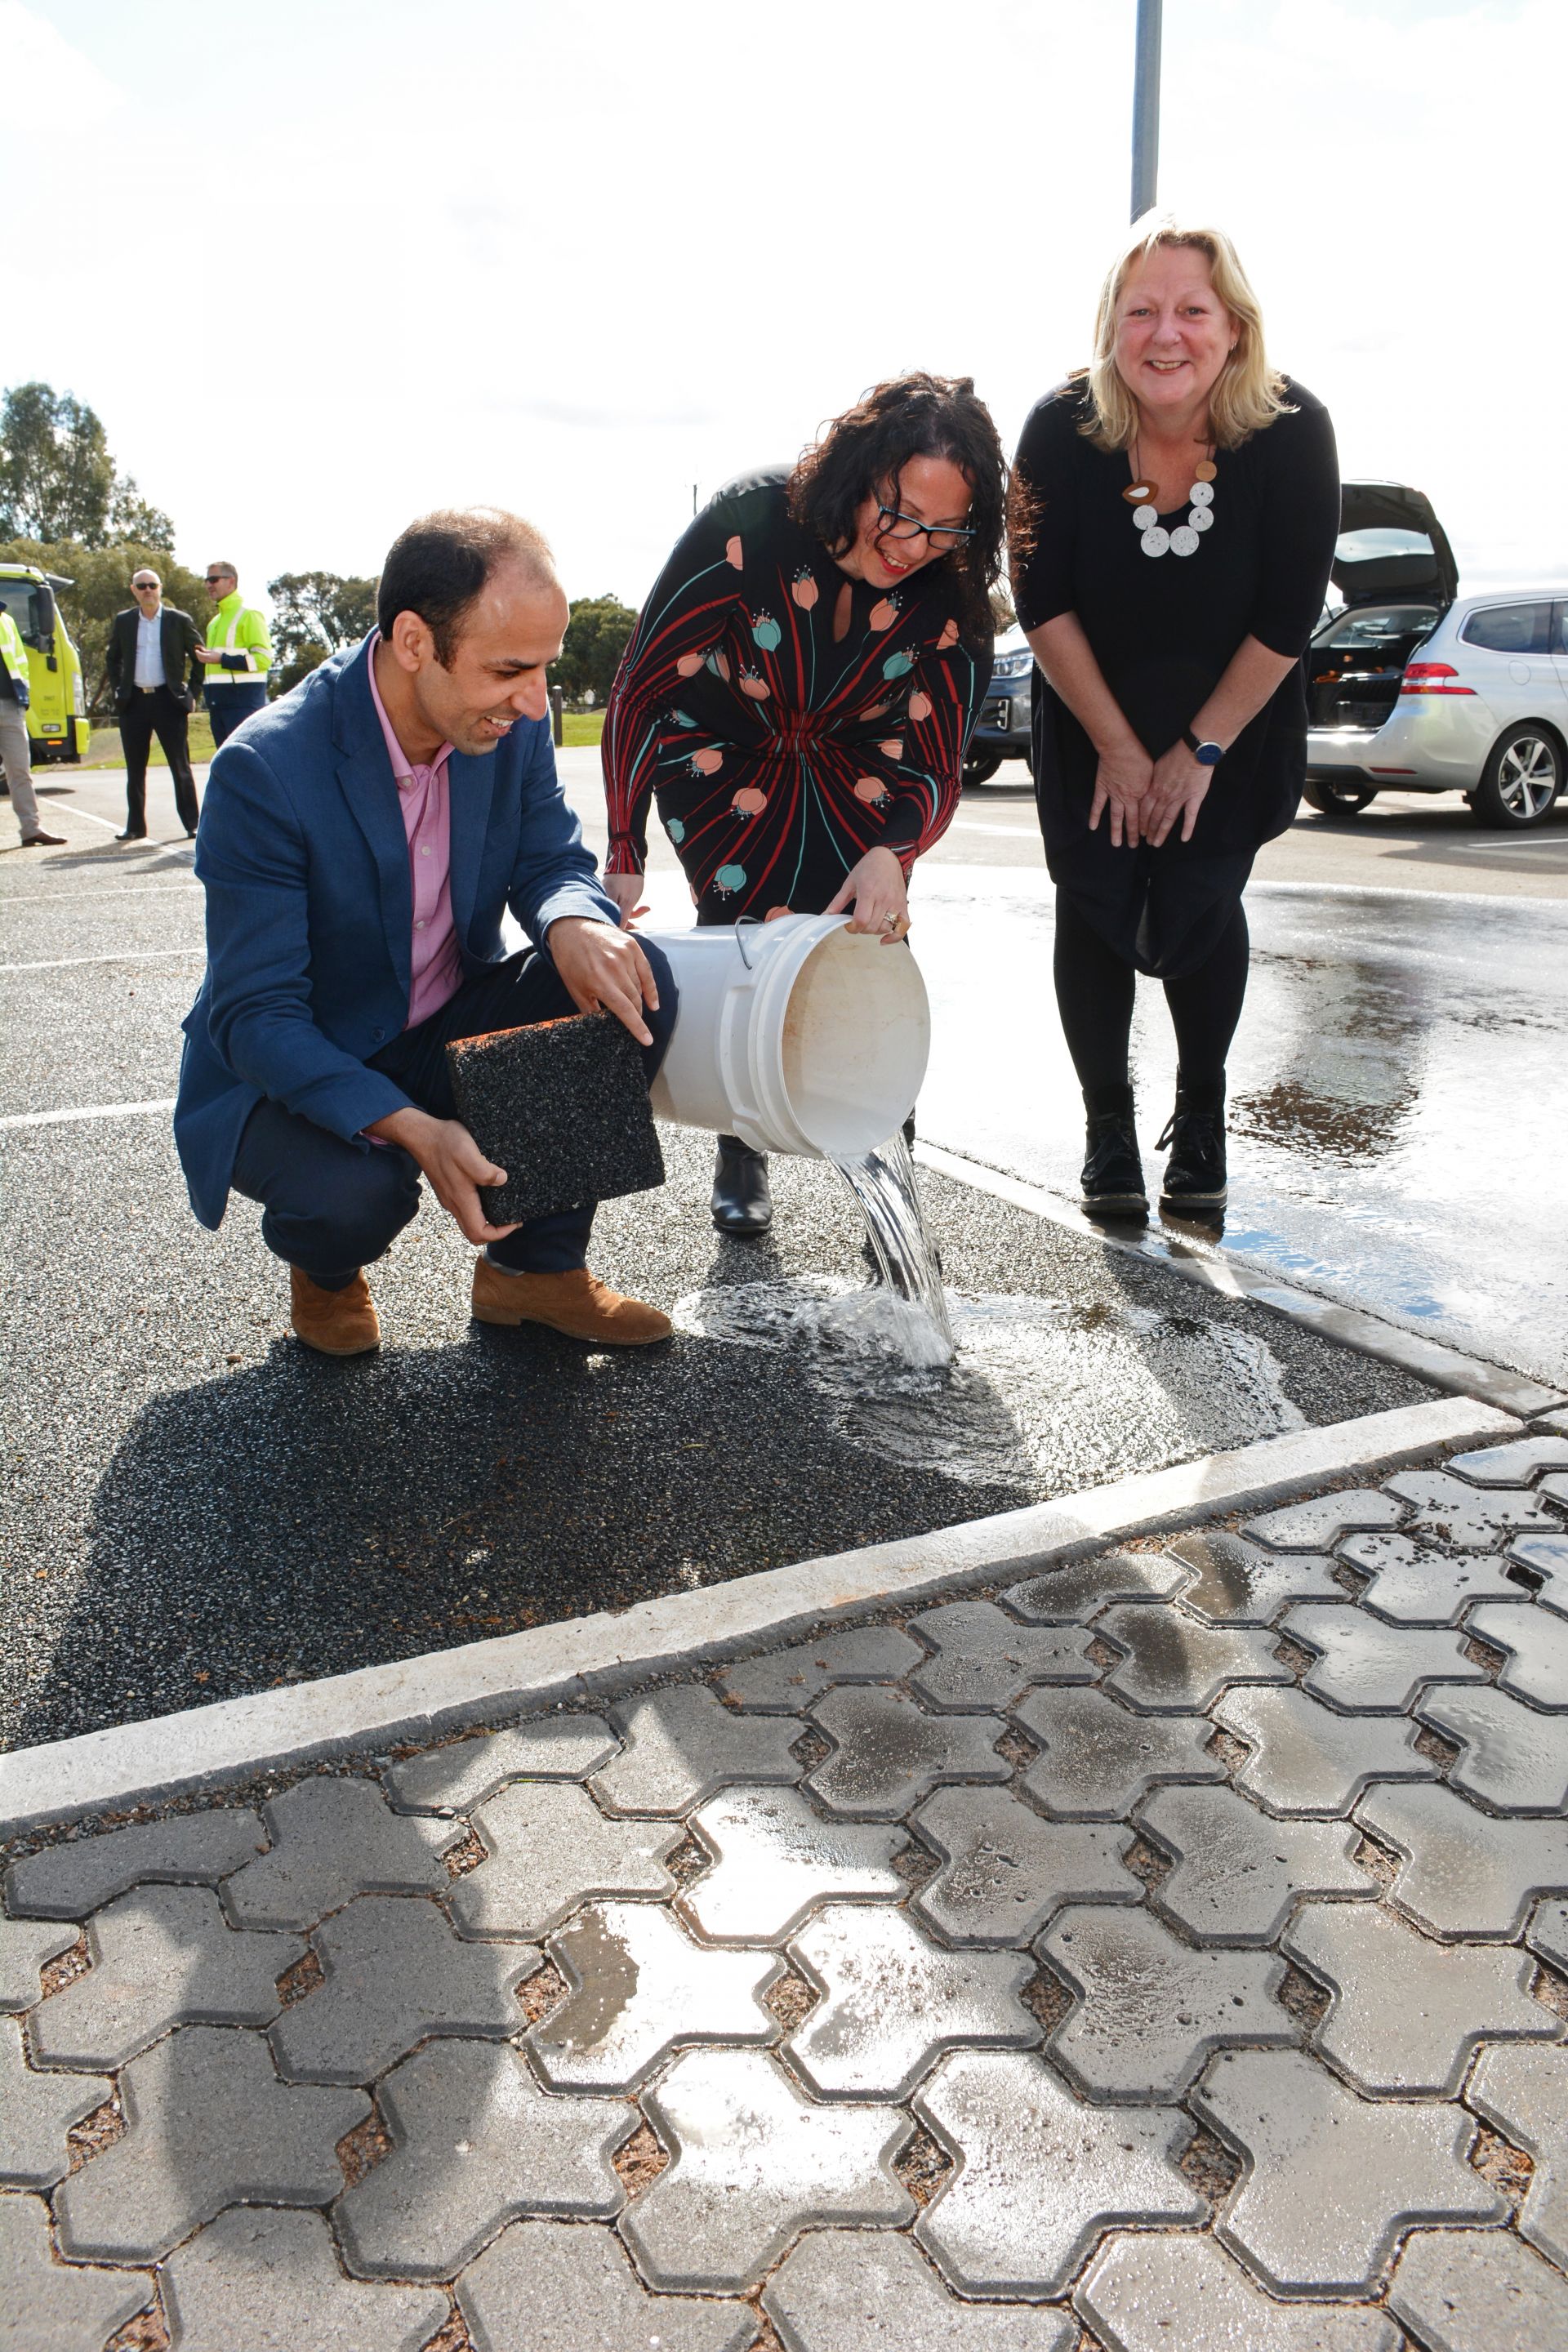 Mahdi Disfani  Senior Lecturer in Geotechnical Engineering at the University of Melbourne, Lina Goodman, Tyre Stewardship Australia CEO and Mayor of the City of Mitcham Dr Heather Holmes-Ross pouring water onto the permeable paving.